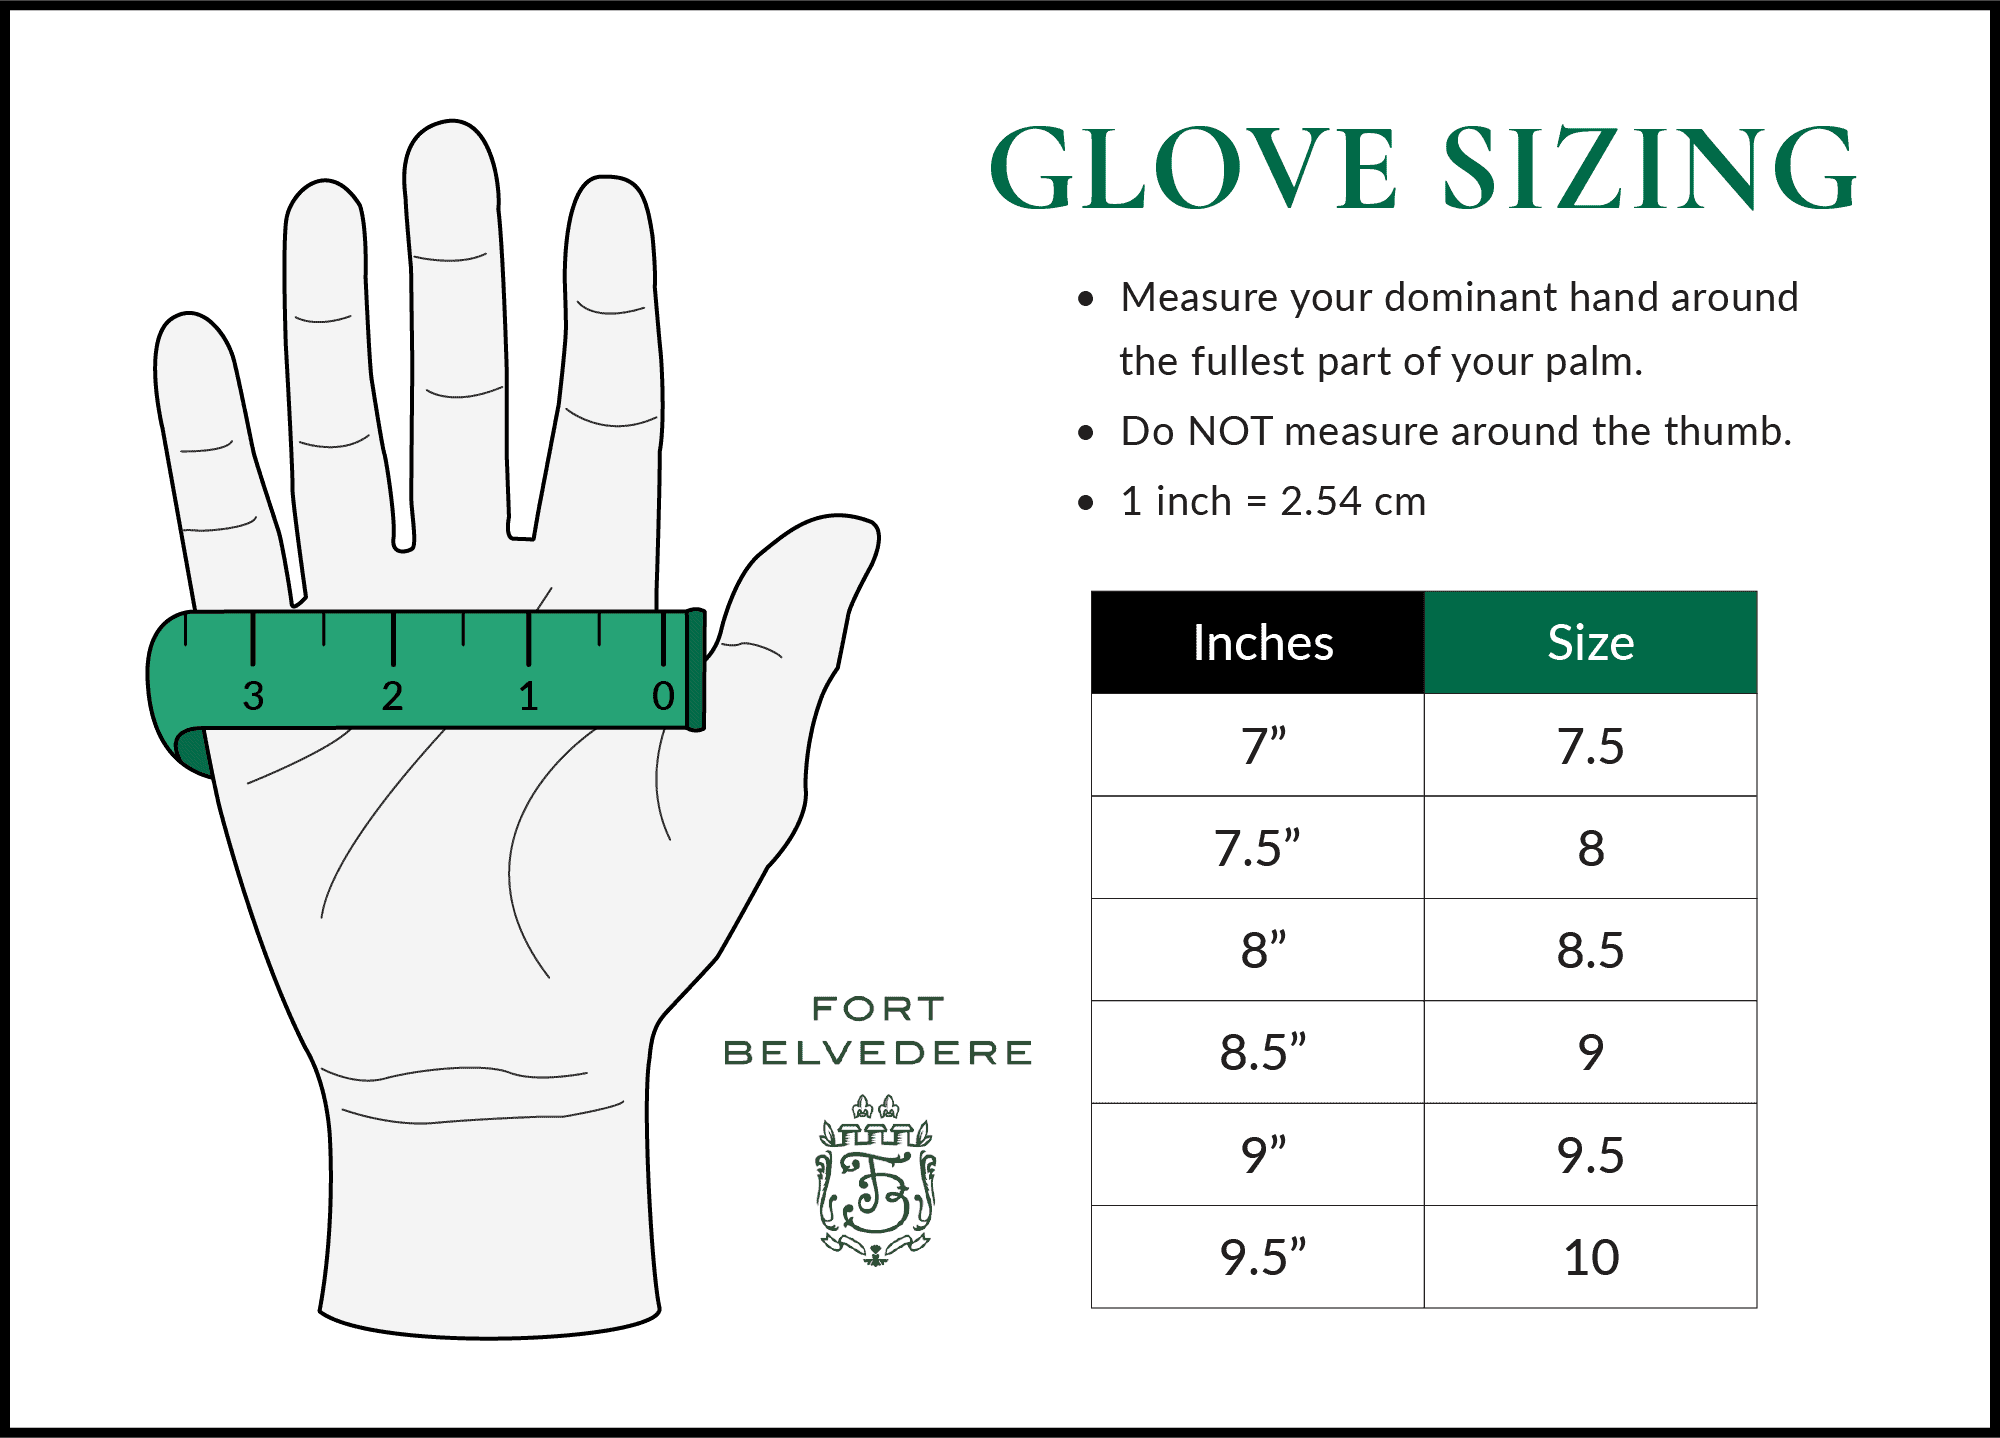 Glove Sizing Chart -Measure circumference. If you have 7" go with size 7.5, if you measure 8.5" choose size 9 and so forth